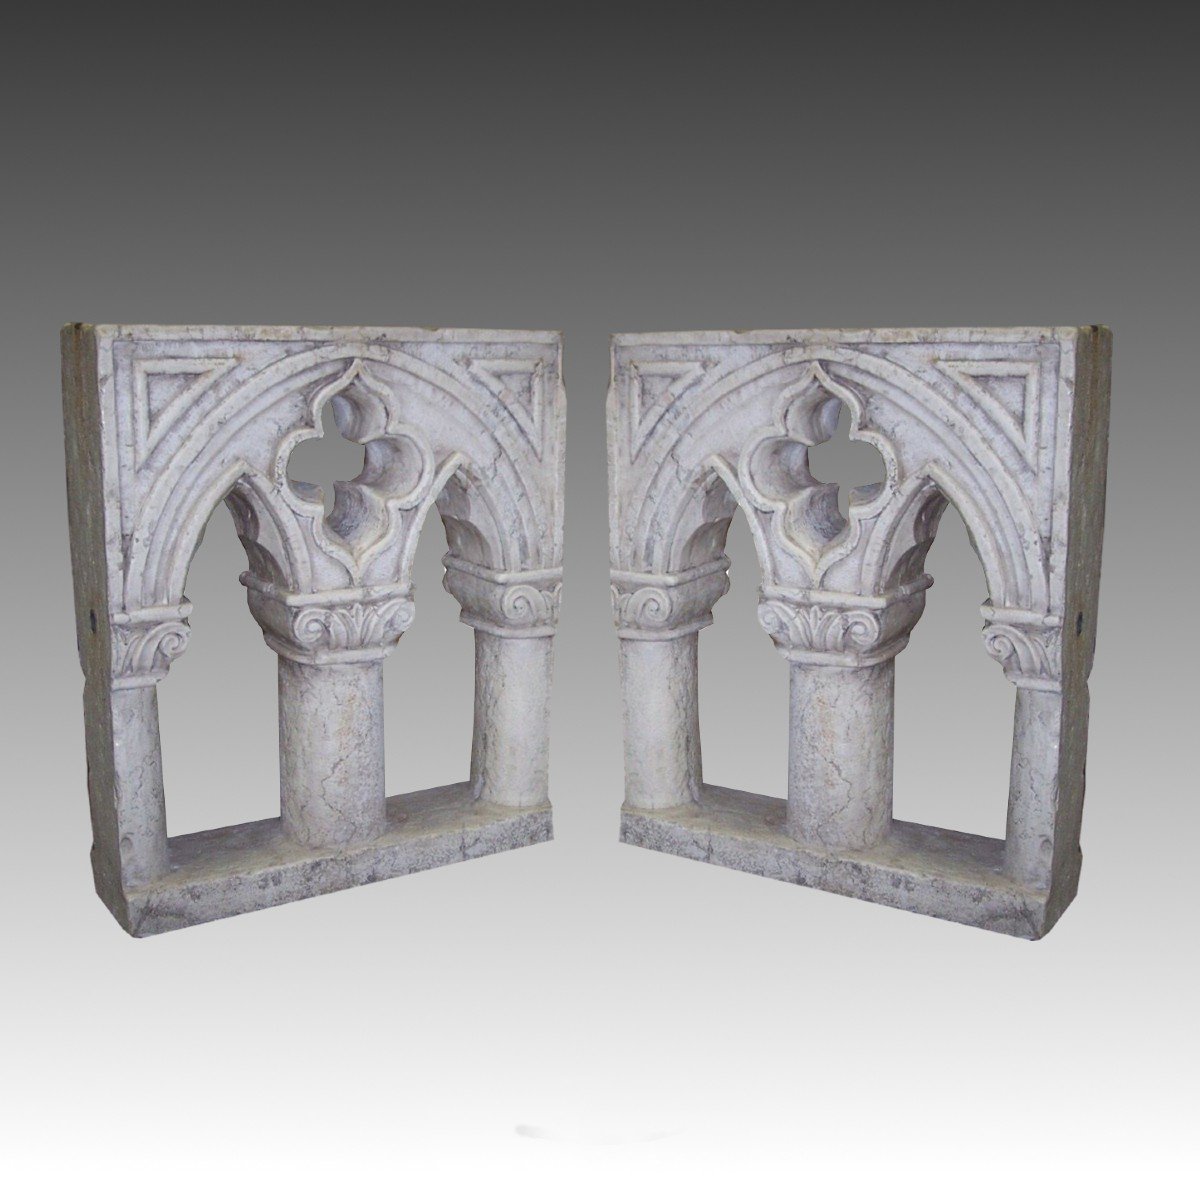 Pair Of Neogothic Windows In White Marble